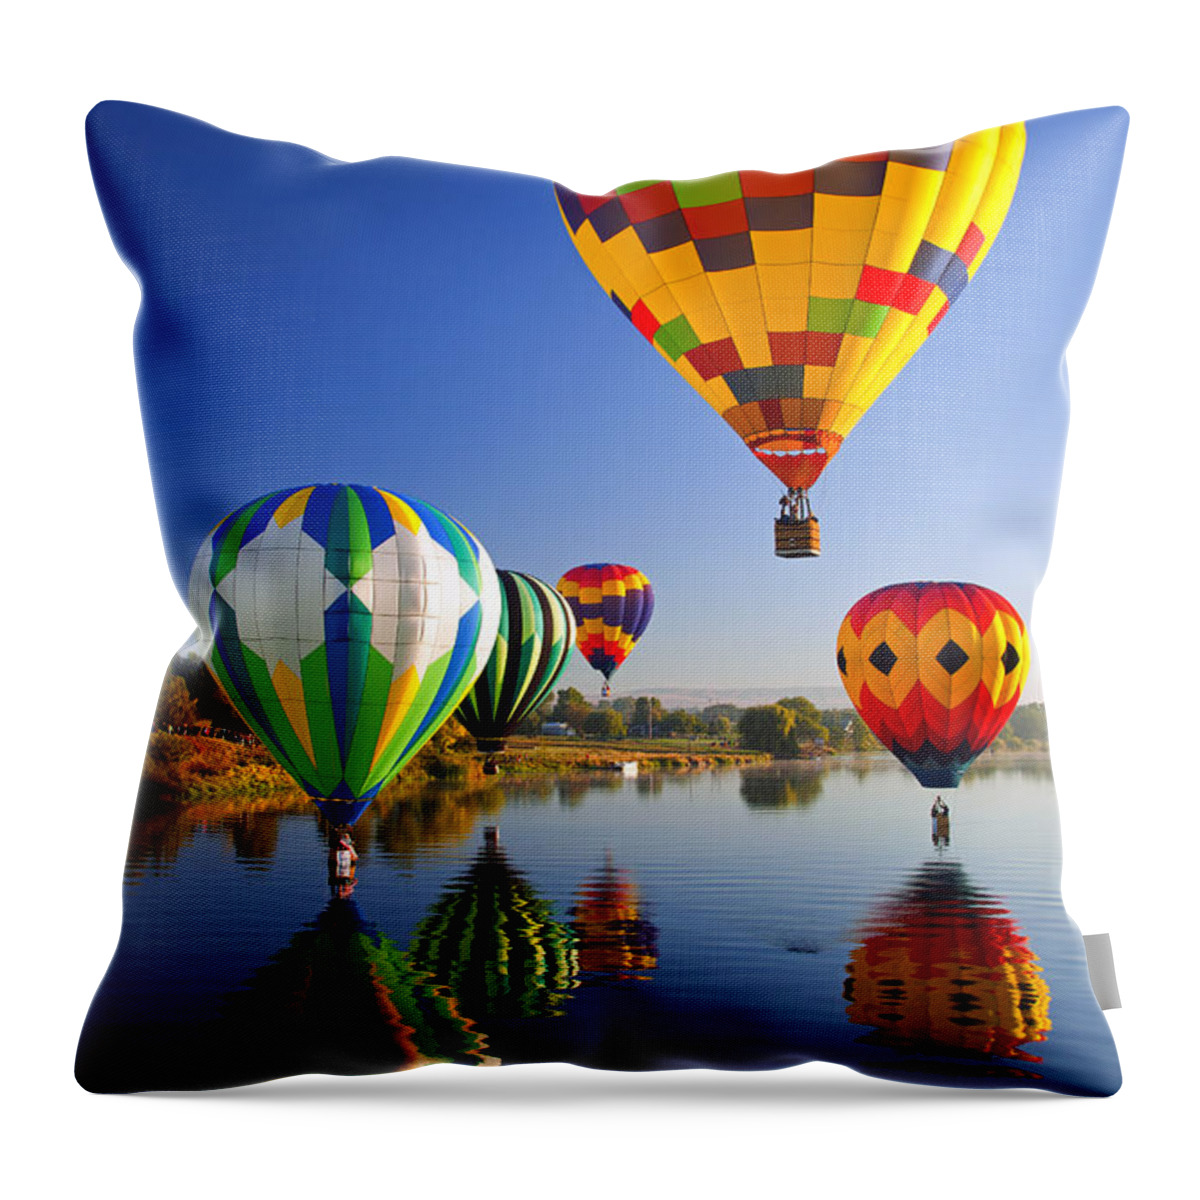 Balloon Throw Pillow featuring the photograph Balloon Reflections by Michael Dawson